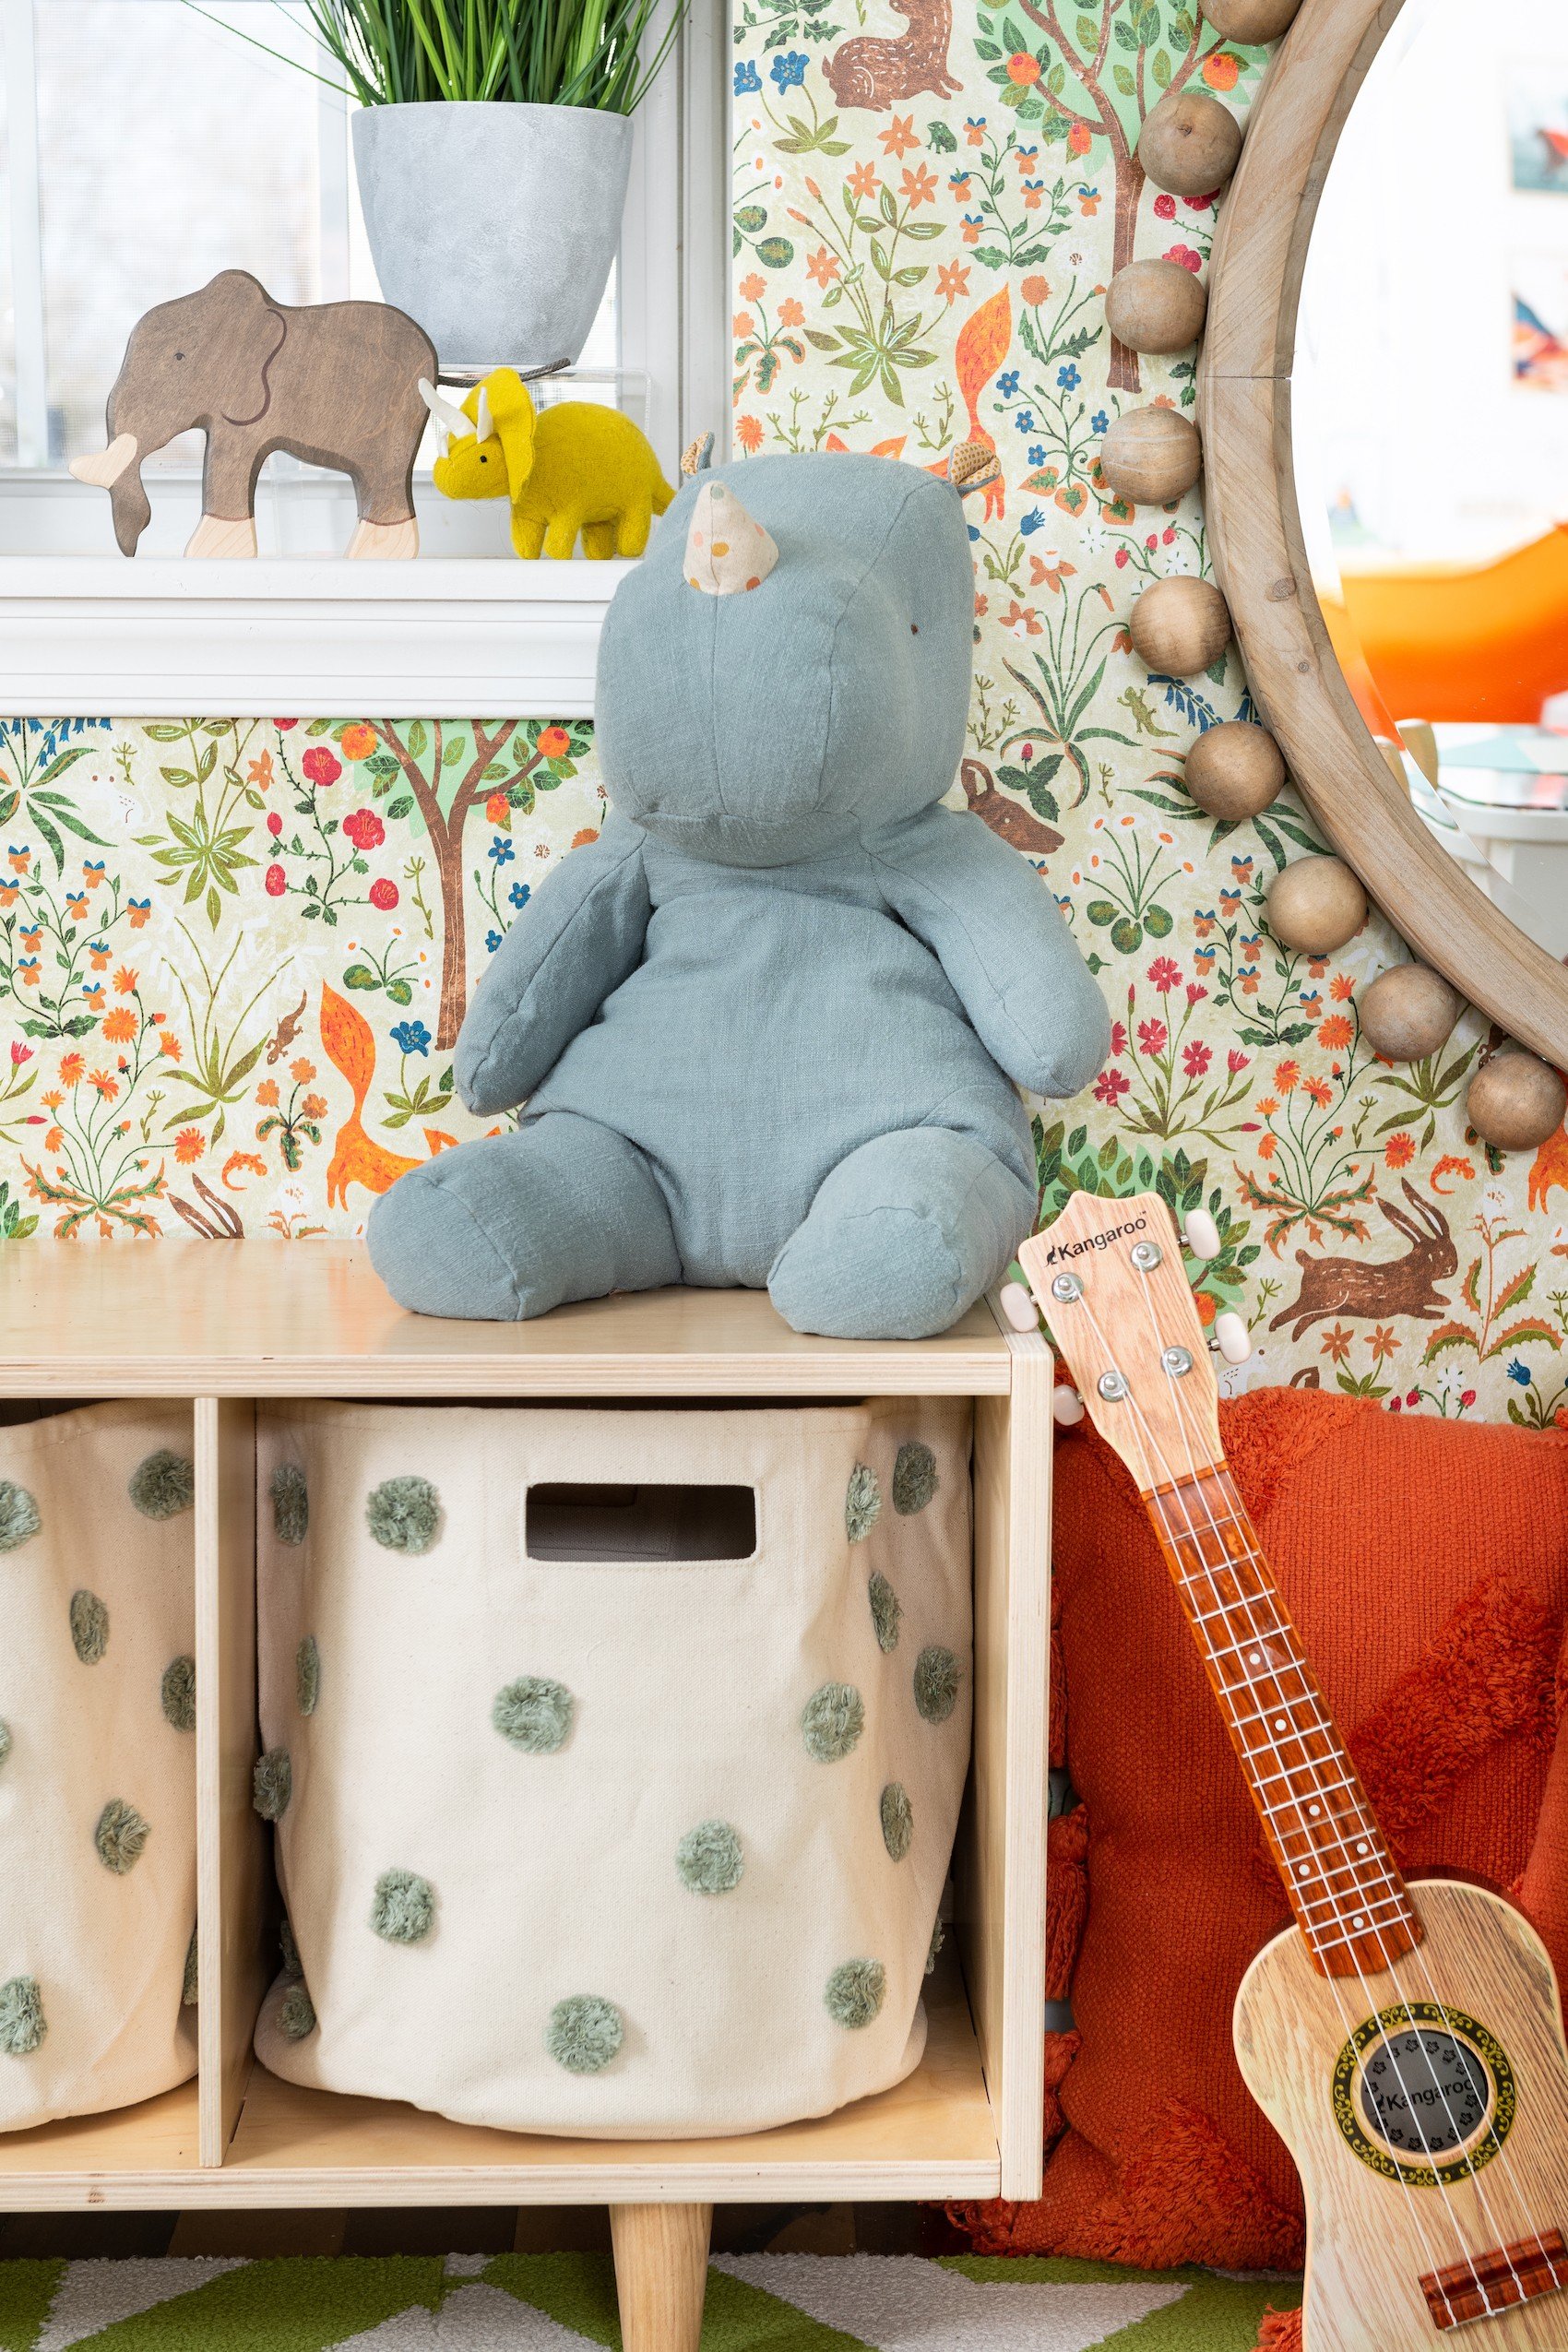 Spring into Action — grOH! Playrooms